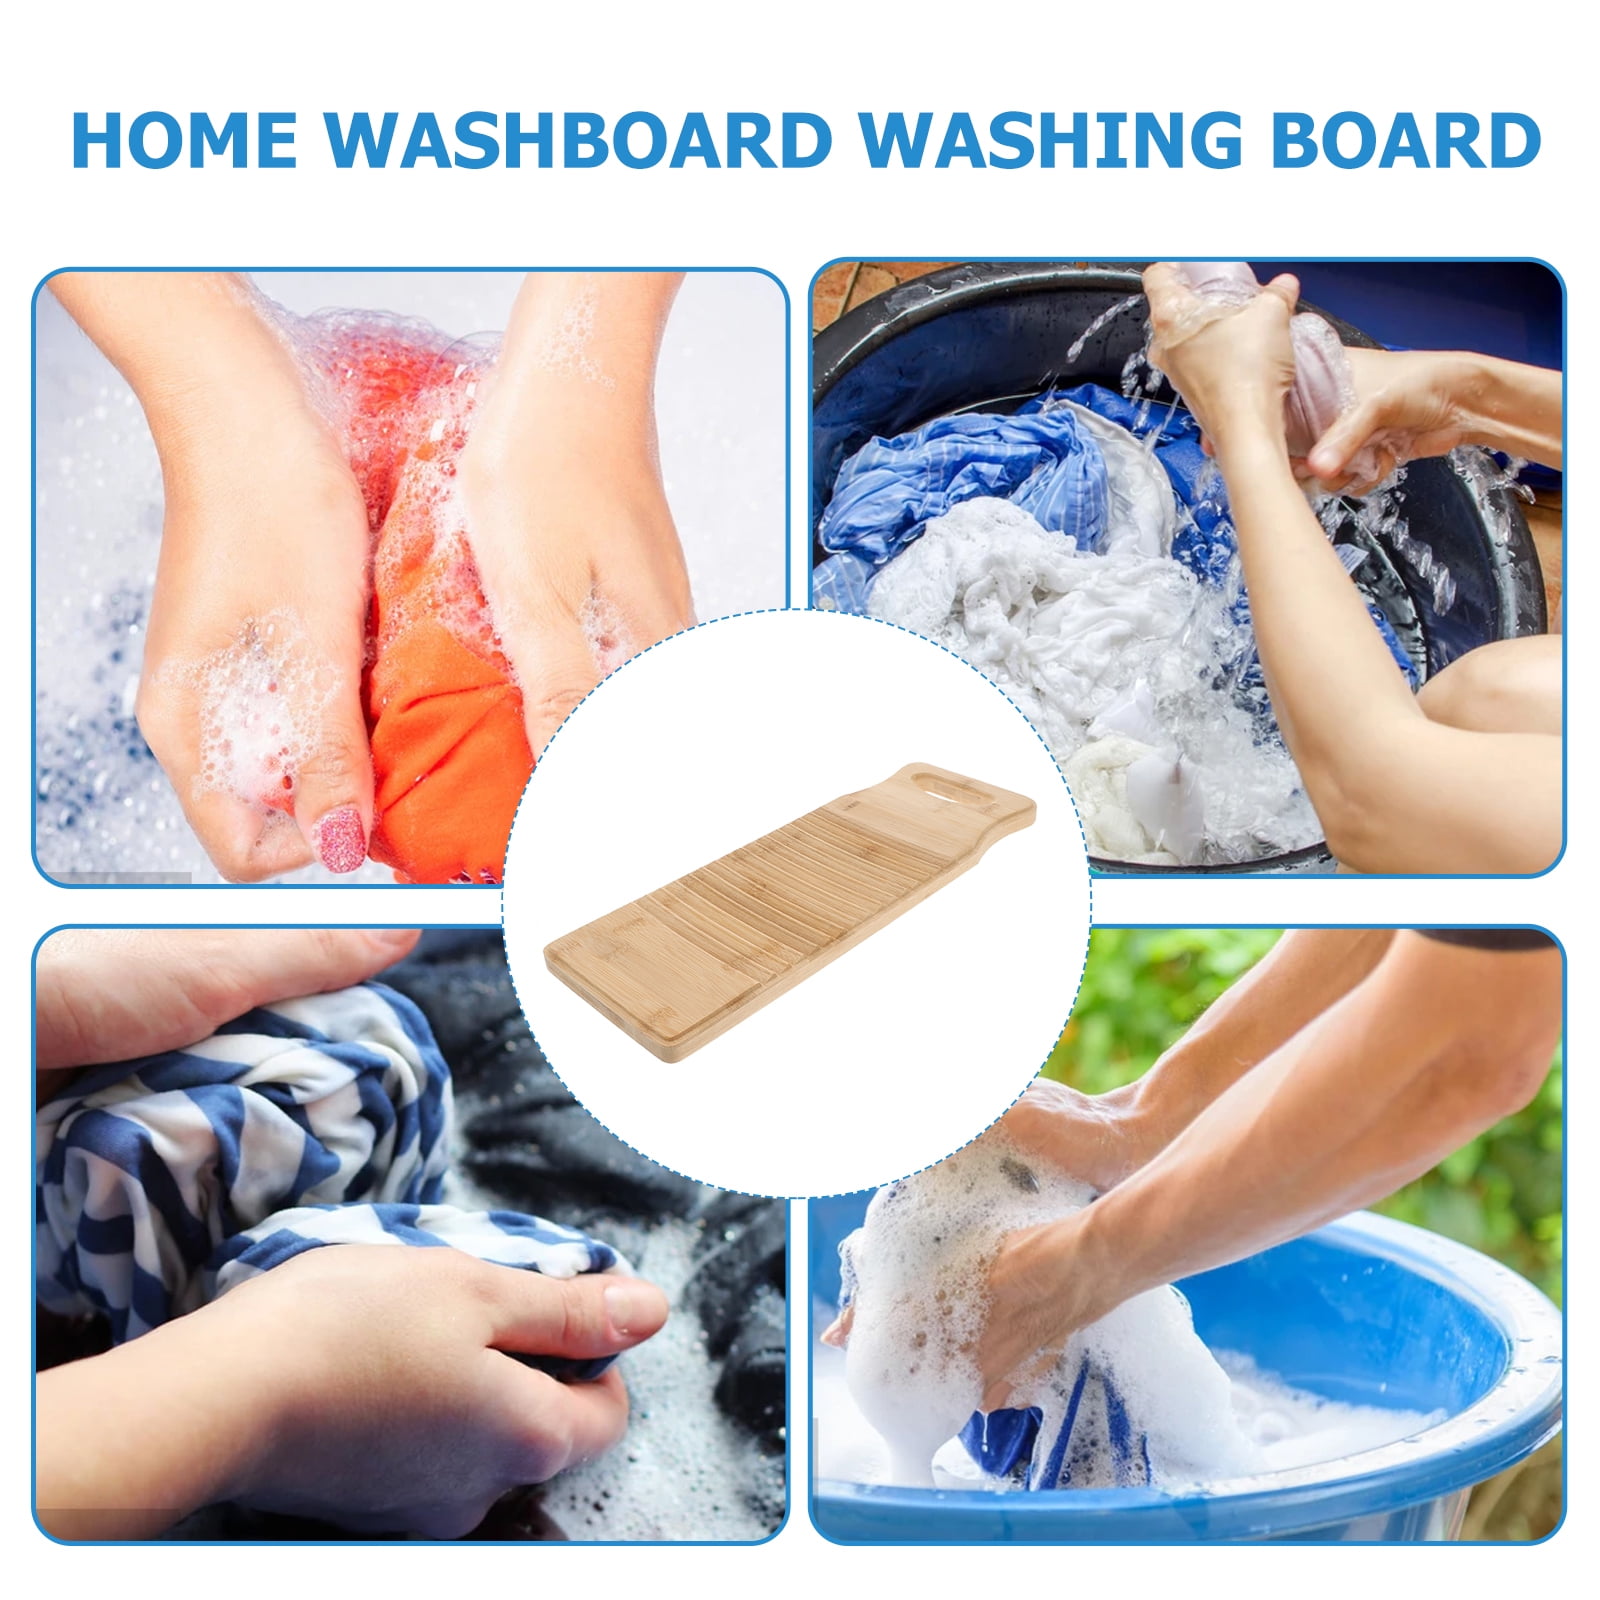  awagas 23.6x7.1 Large Bamboo Washboard, Hand Washing Board,  Laundry Washboard for Hand Washing Clothes, Clothes Wash Boards-old  Fashioned Hand Wash Board for Shirts Clean Home Laundry Supplies-(L) : Home  & Kitchen